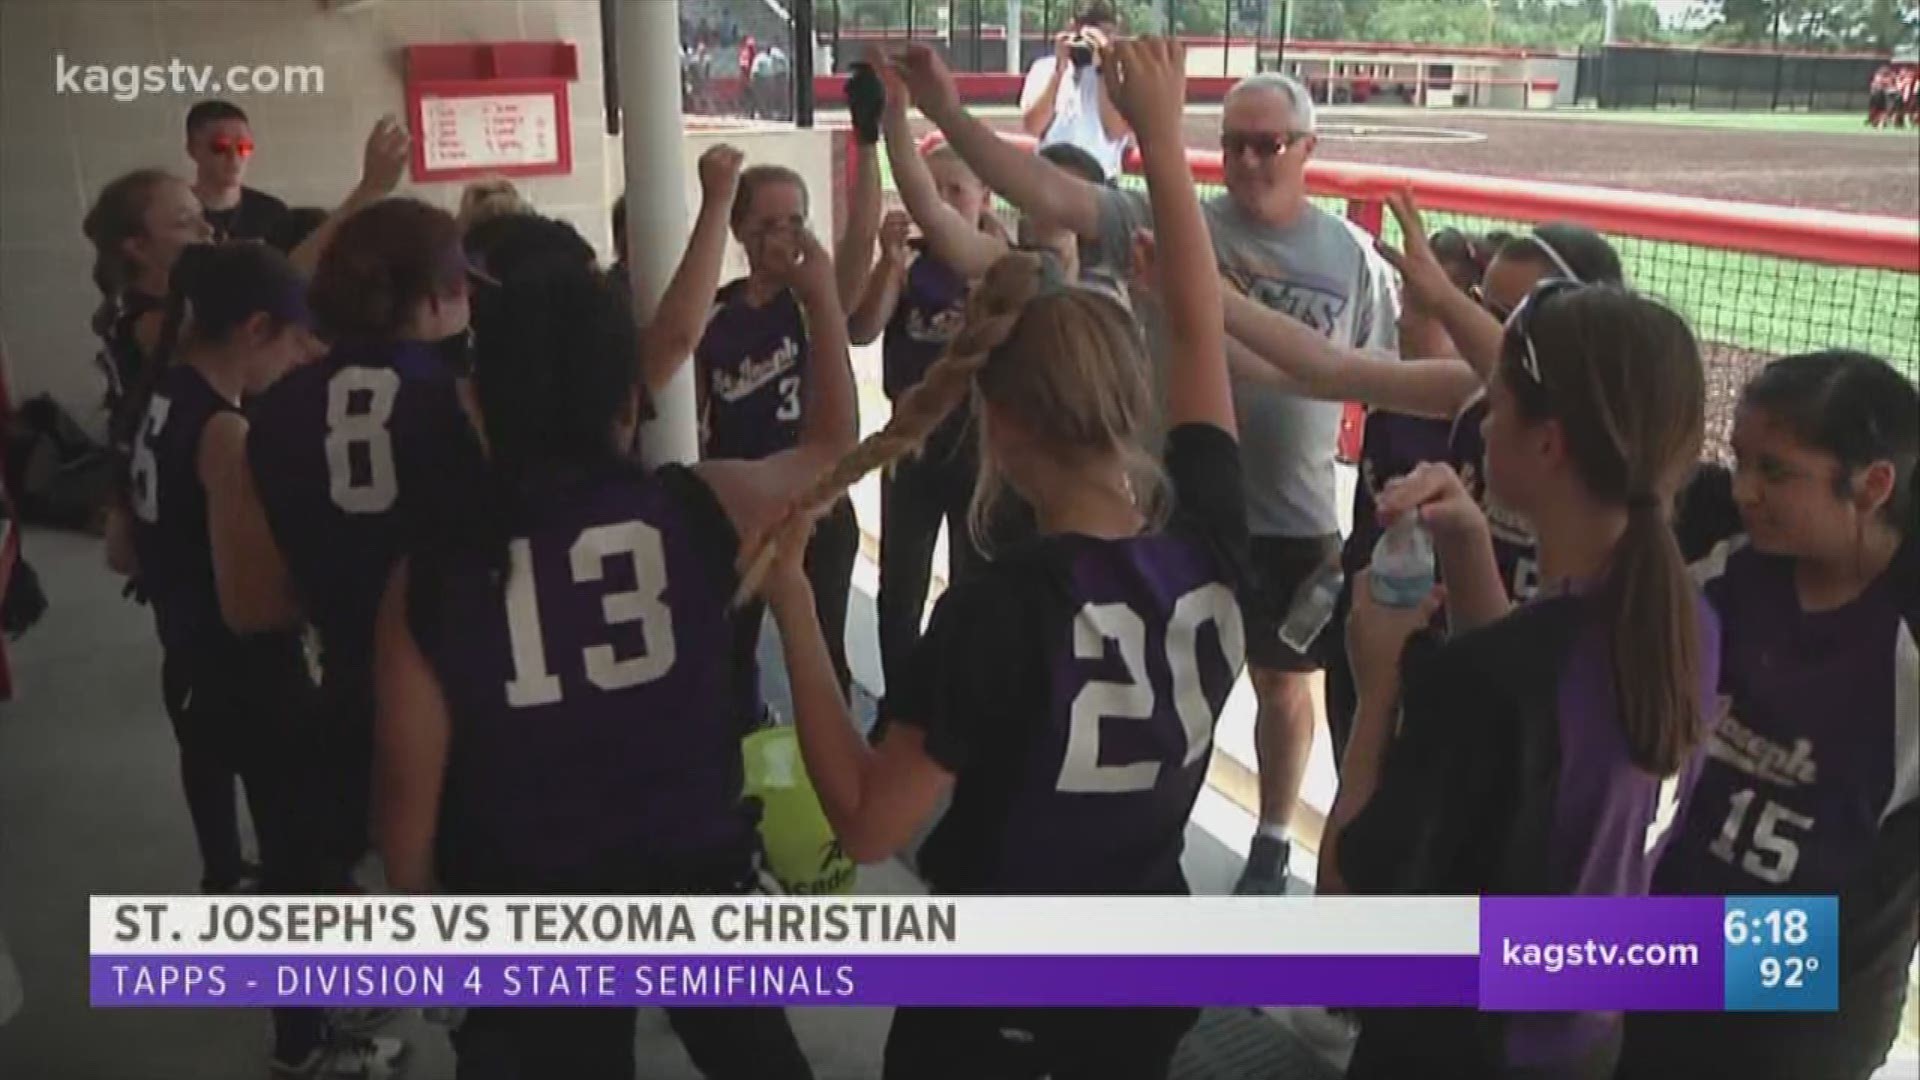 Texoma Christian no-hit St. Joseph and won 4-0 in the TAPPs Division IV State Semifinals on Wednesday afternoon.